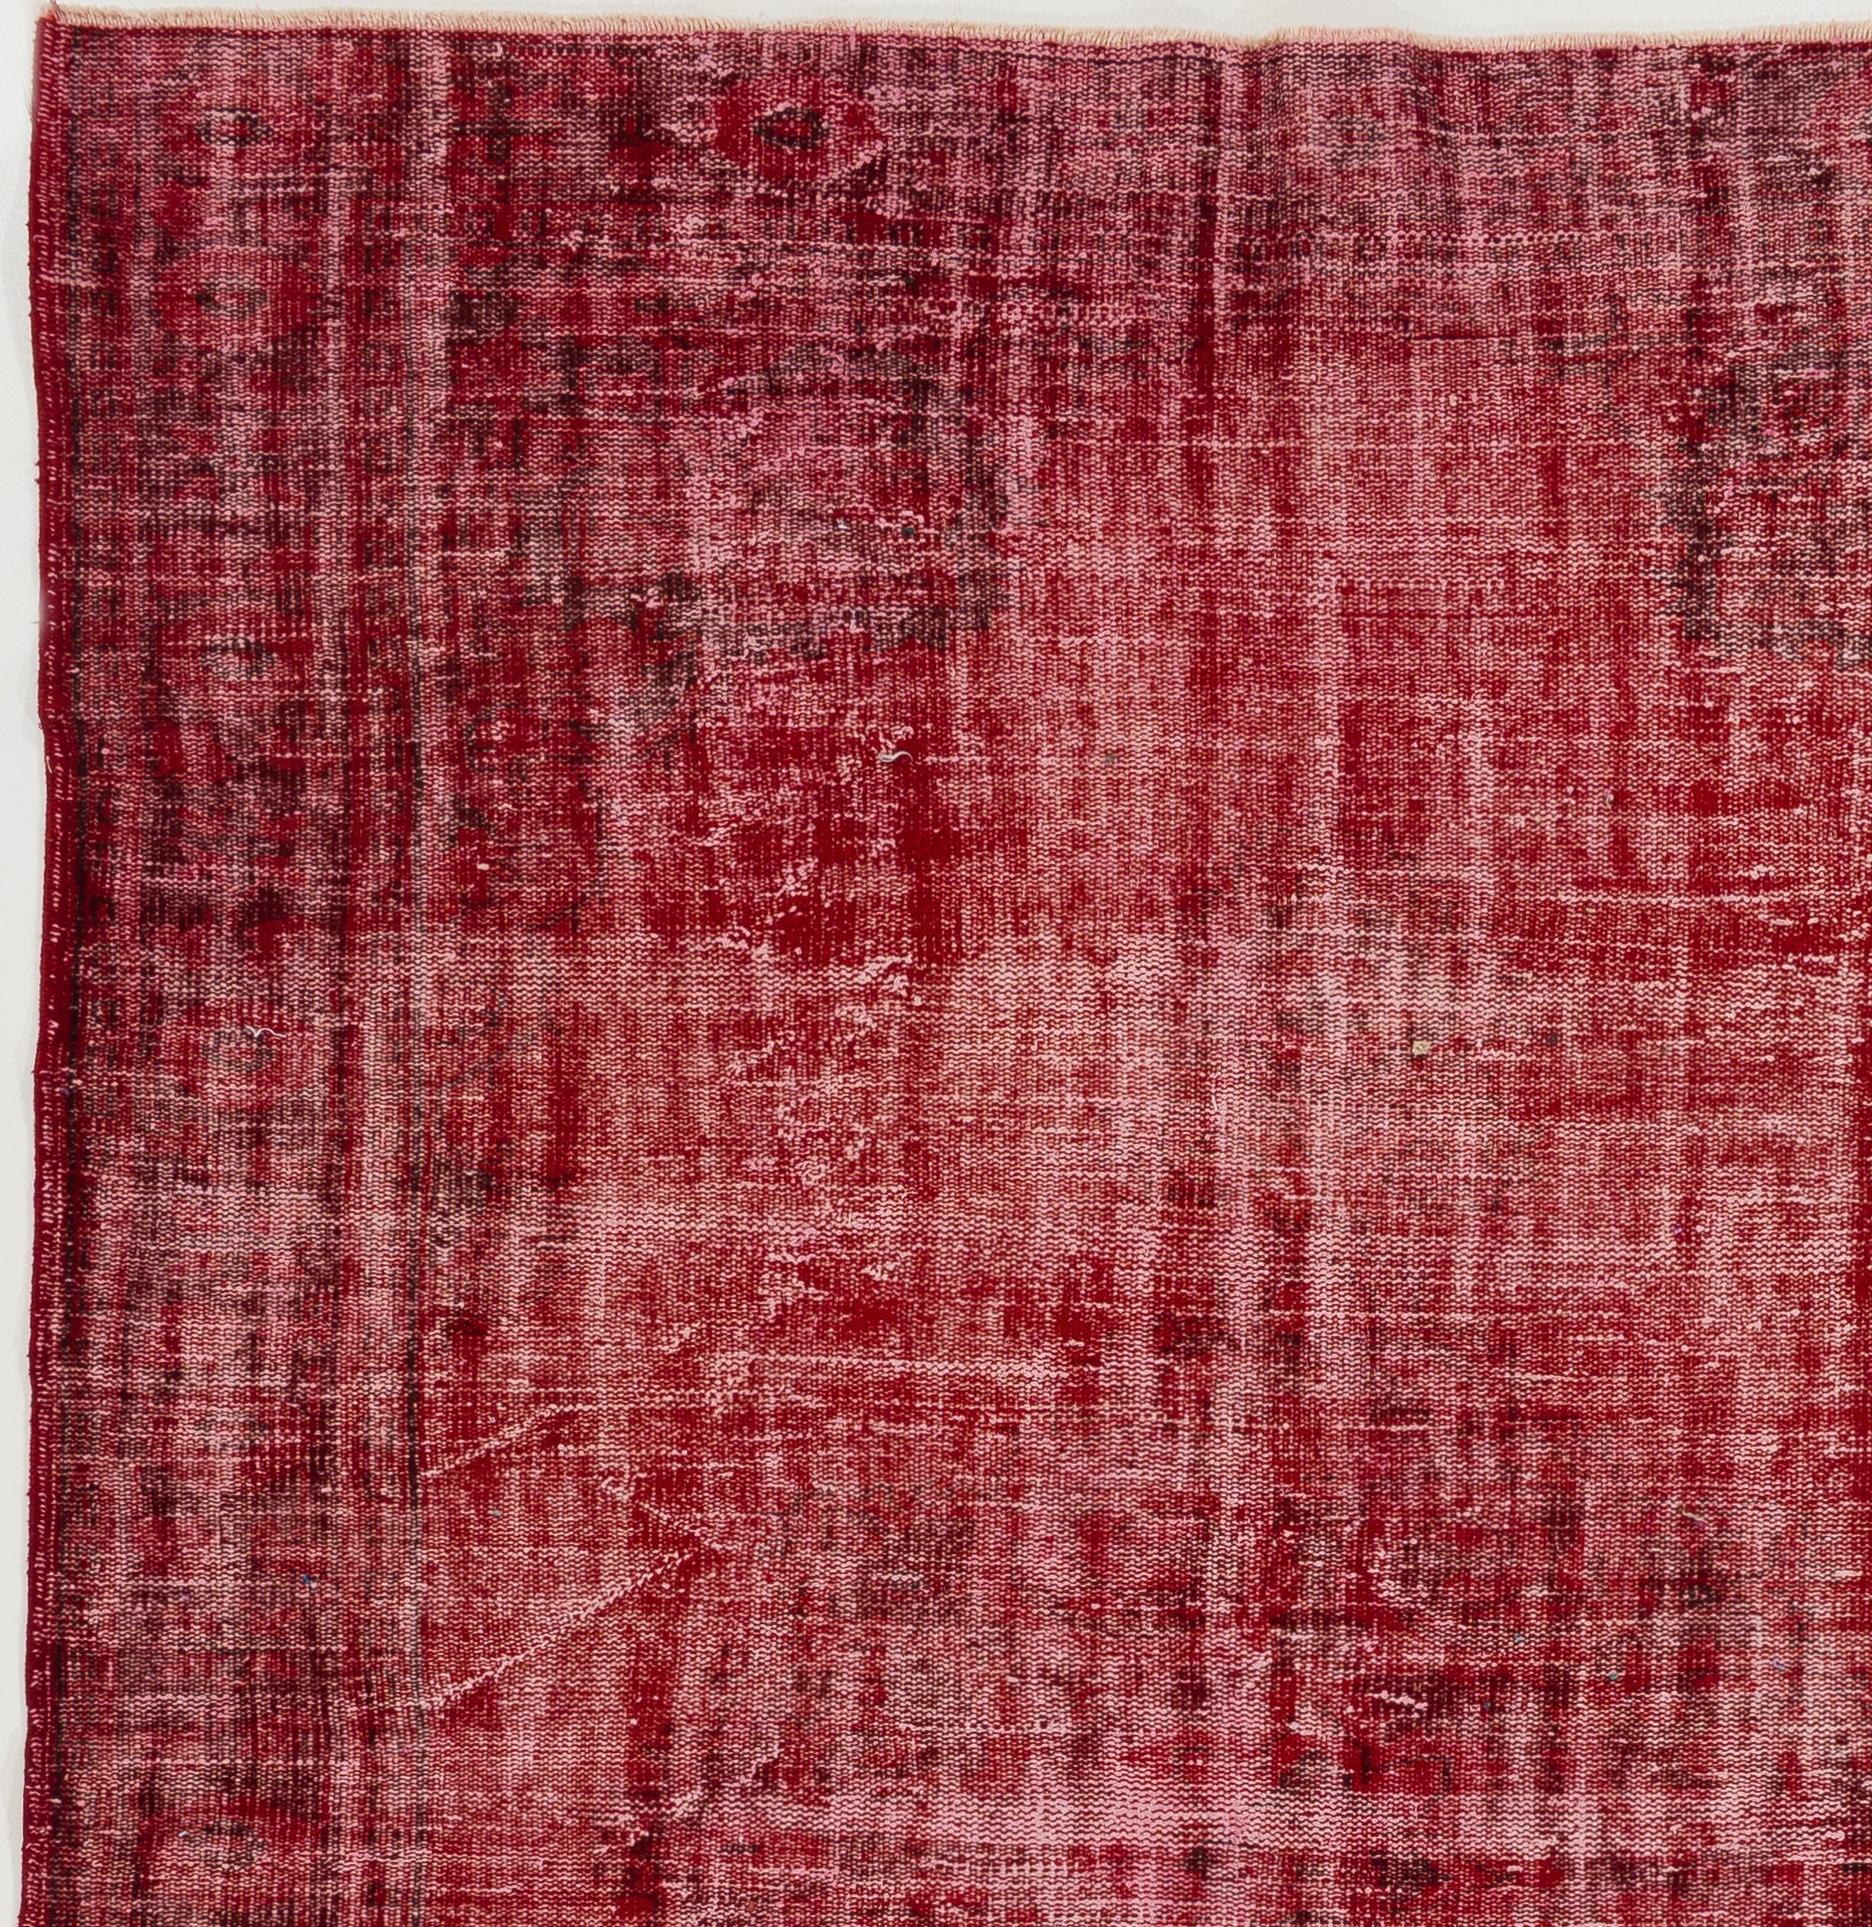 Hand-Knotted Shabby Chic Handmade Wool Rug in Burgundy Red, Vintage Turkish Carpet For Sale